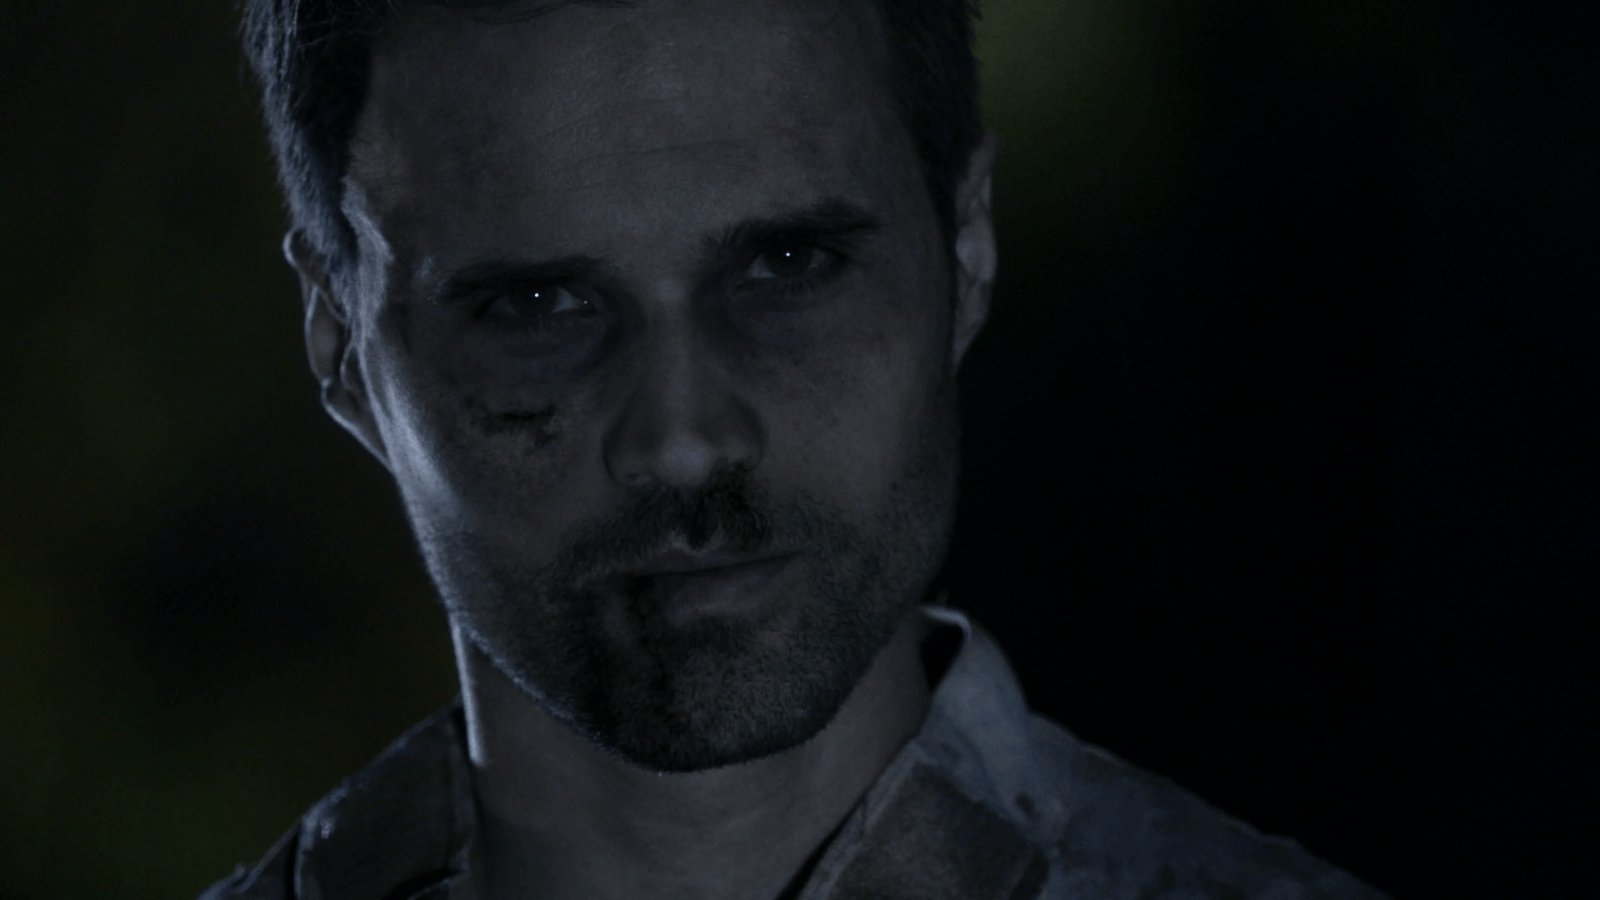 Identity of the Marvel villain Grant Ward has become on Agents